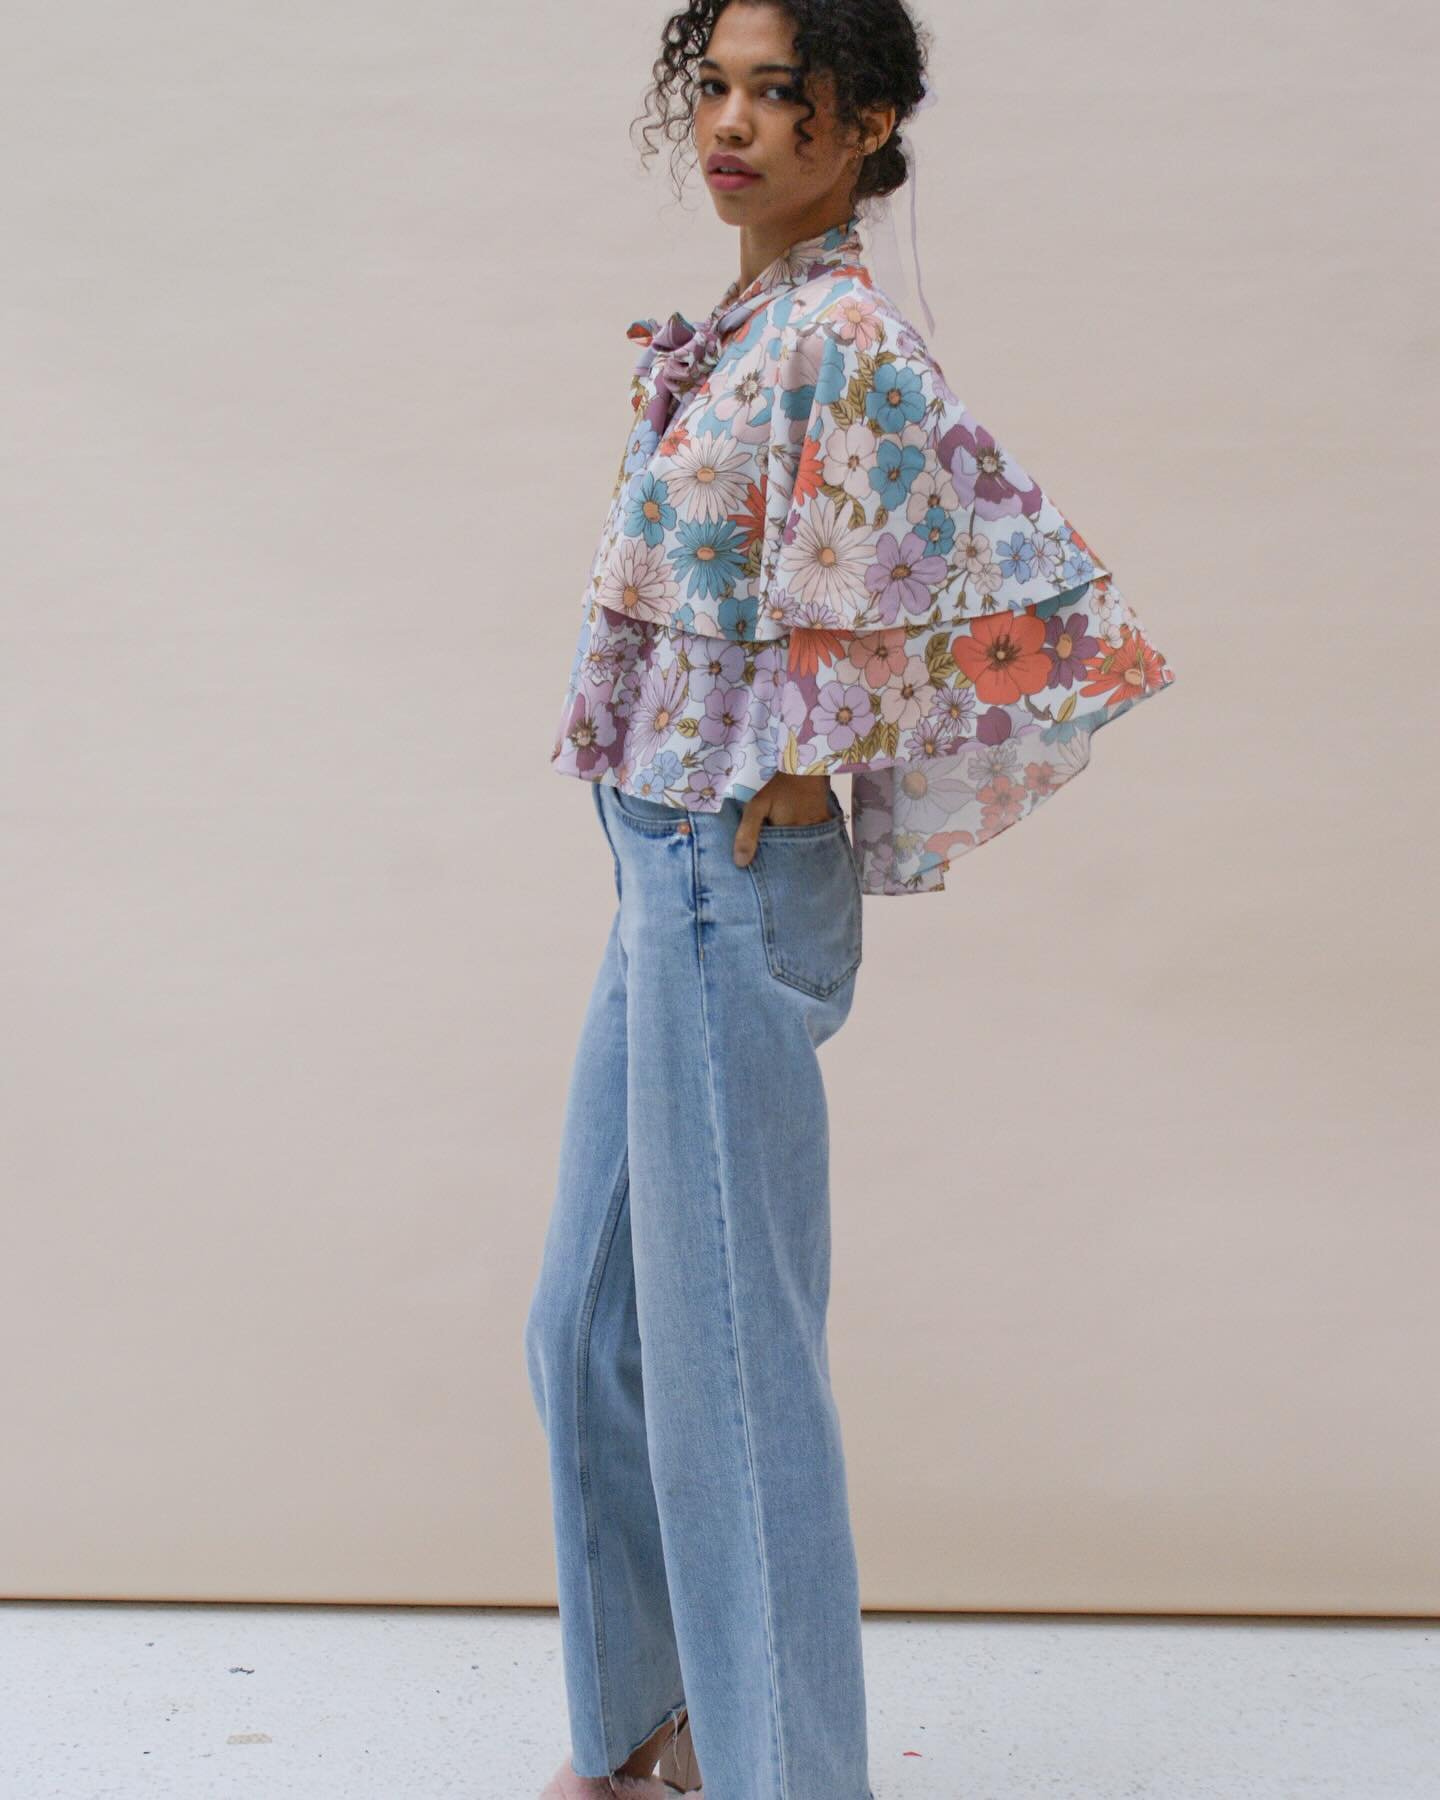 Transform your Summer wardrobe with Becky in Wildflower.
&bull;
The show-stopping vintage-inspired cape of your dreams ensures you&rsquo;ll always bring planet-friendly main character energy to every event you attend!
&bull;
On a mission to inspire t